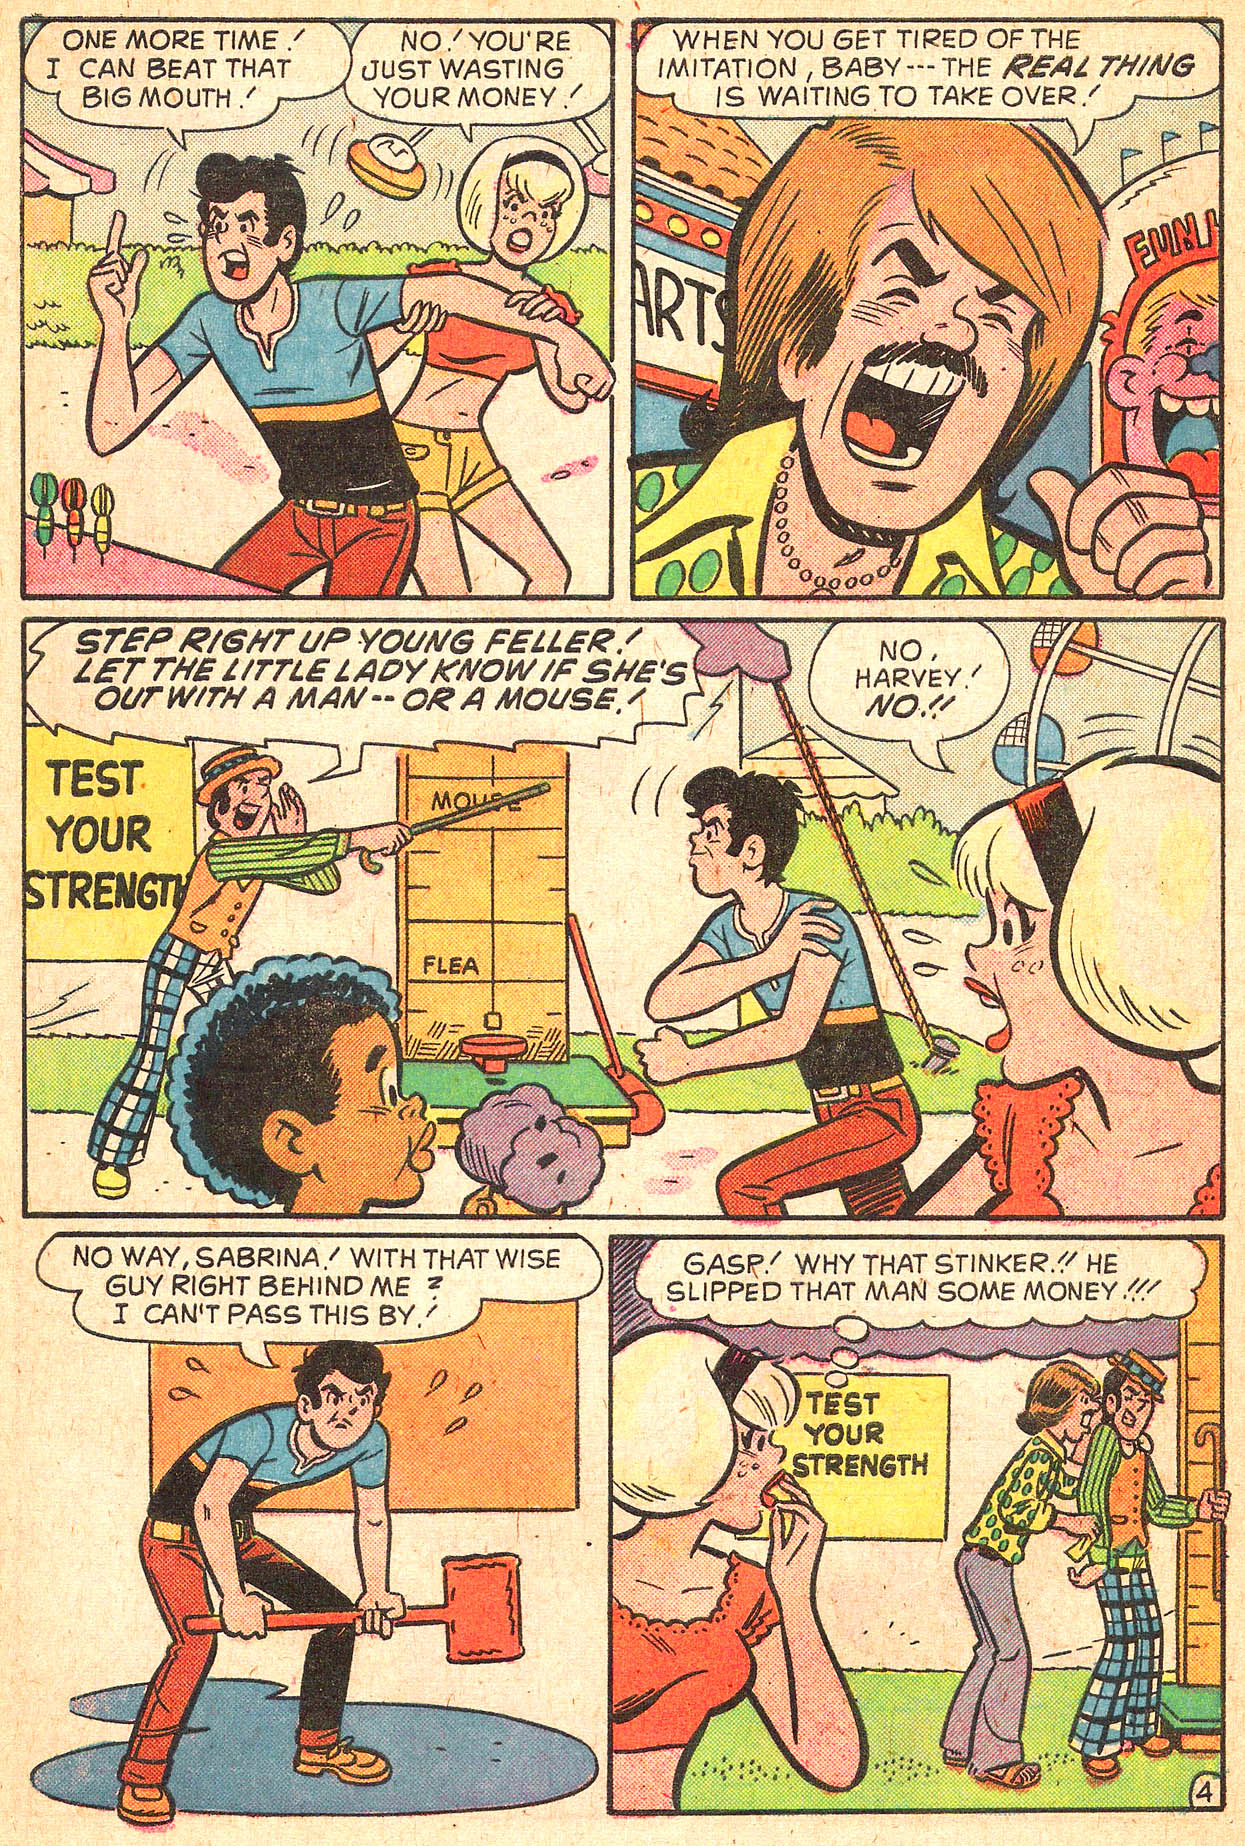 Sabrina The Teenage Witch (1971) Issue #21 #21 - English 6